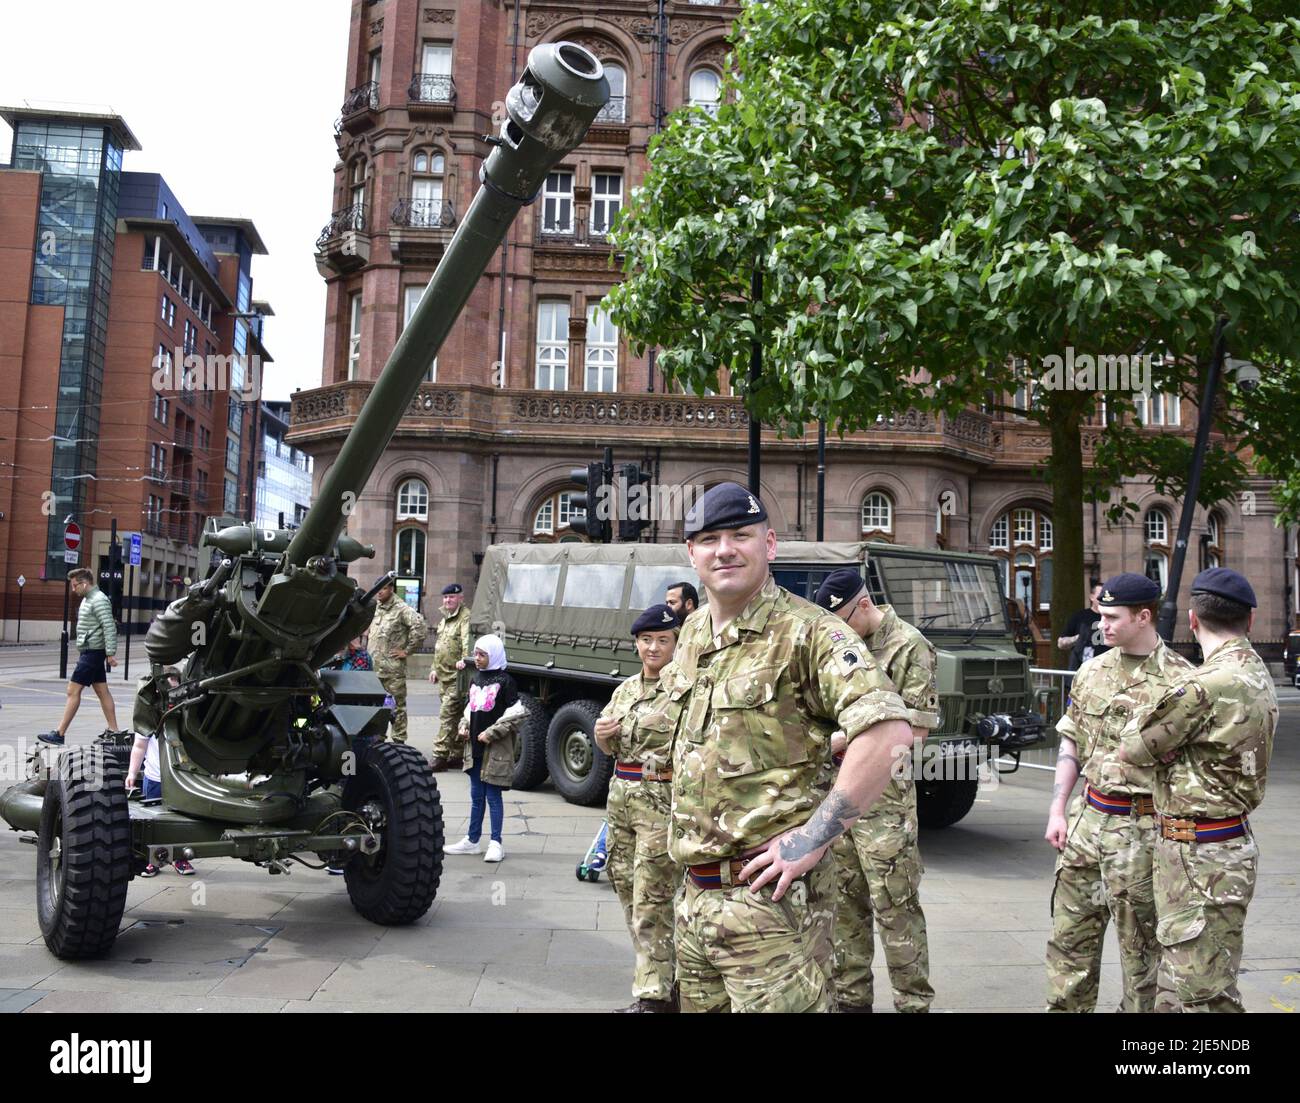 Manchester, UK, 25th June, 2022. Soldiers pose with an Ll18, 105 mm artillery gun. Armed Forces Day is celebrated in St Peter's Square, Manchester, England, United Kingdom, British Isles.  Credit: Terry Waller/Alamy Live News Stock Photo